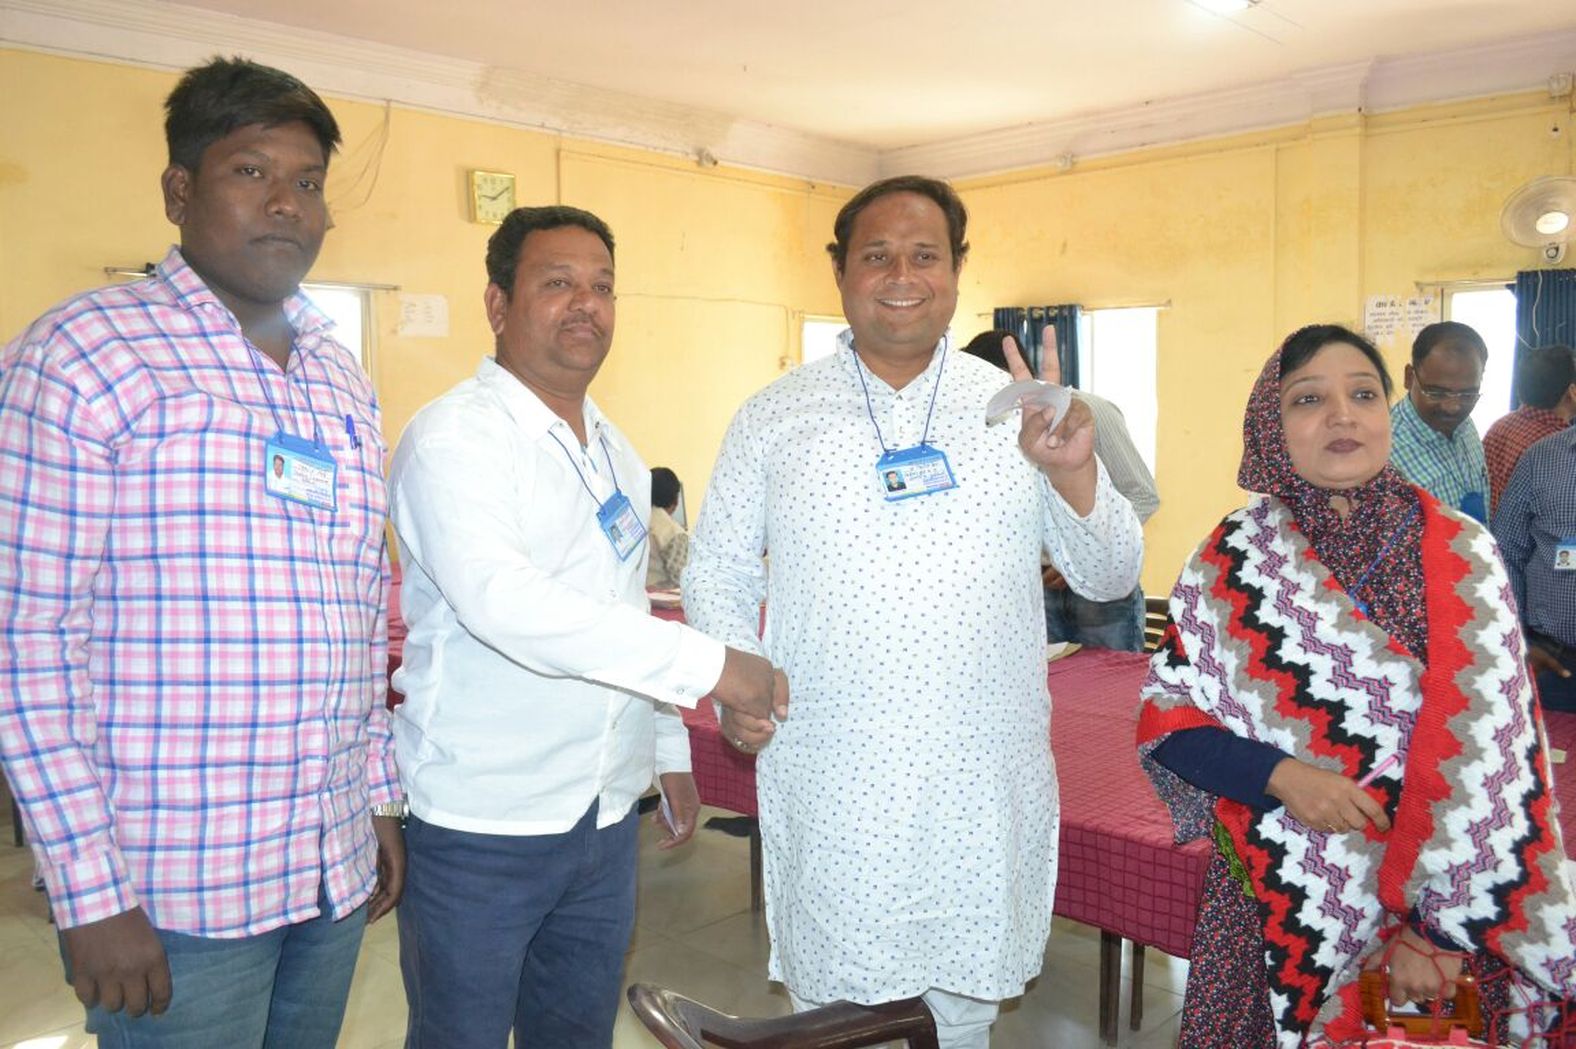  Hina Beg defeated the candidate of the MP faction by 1040 votes